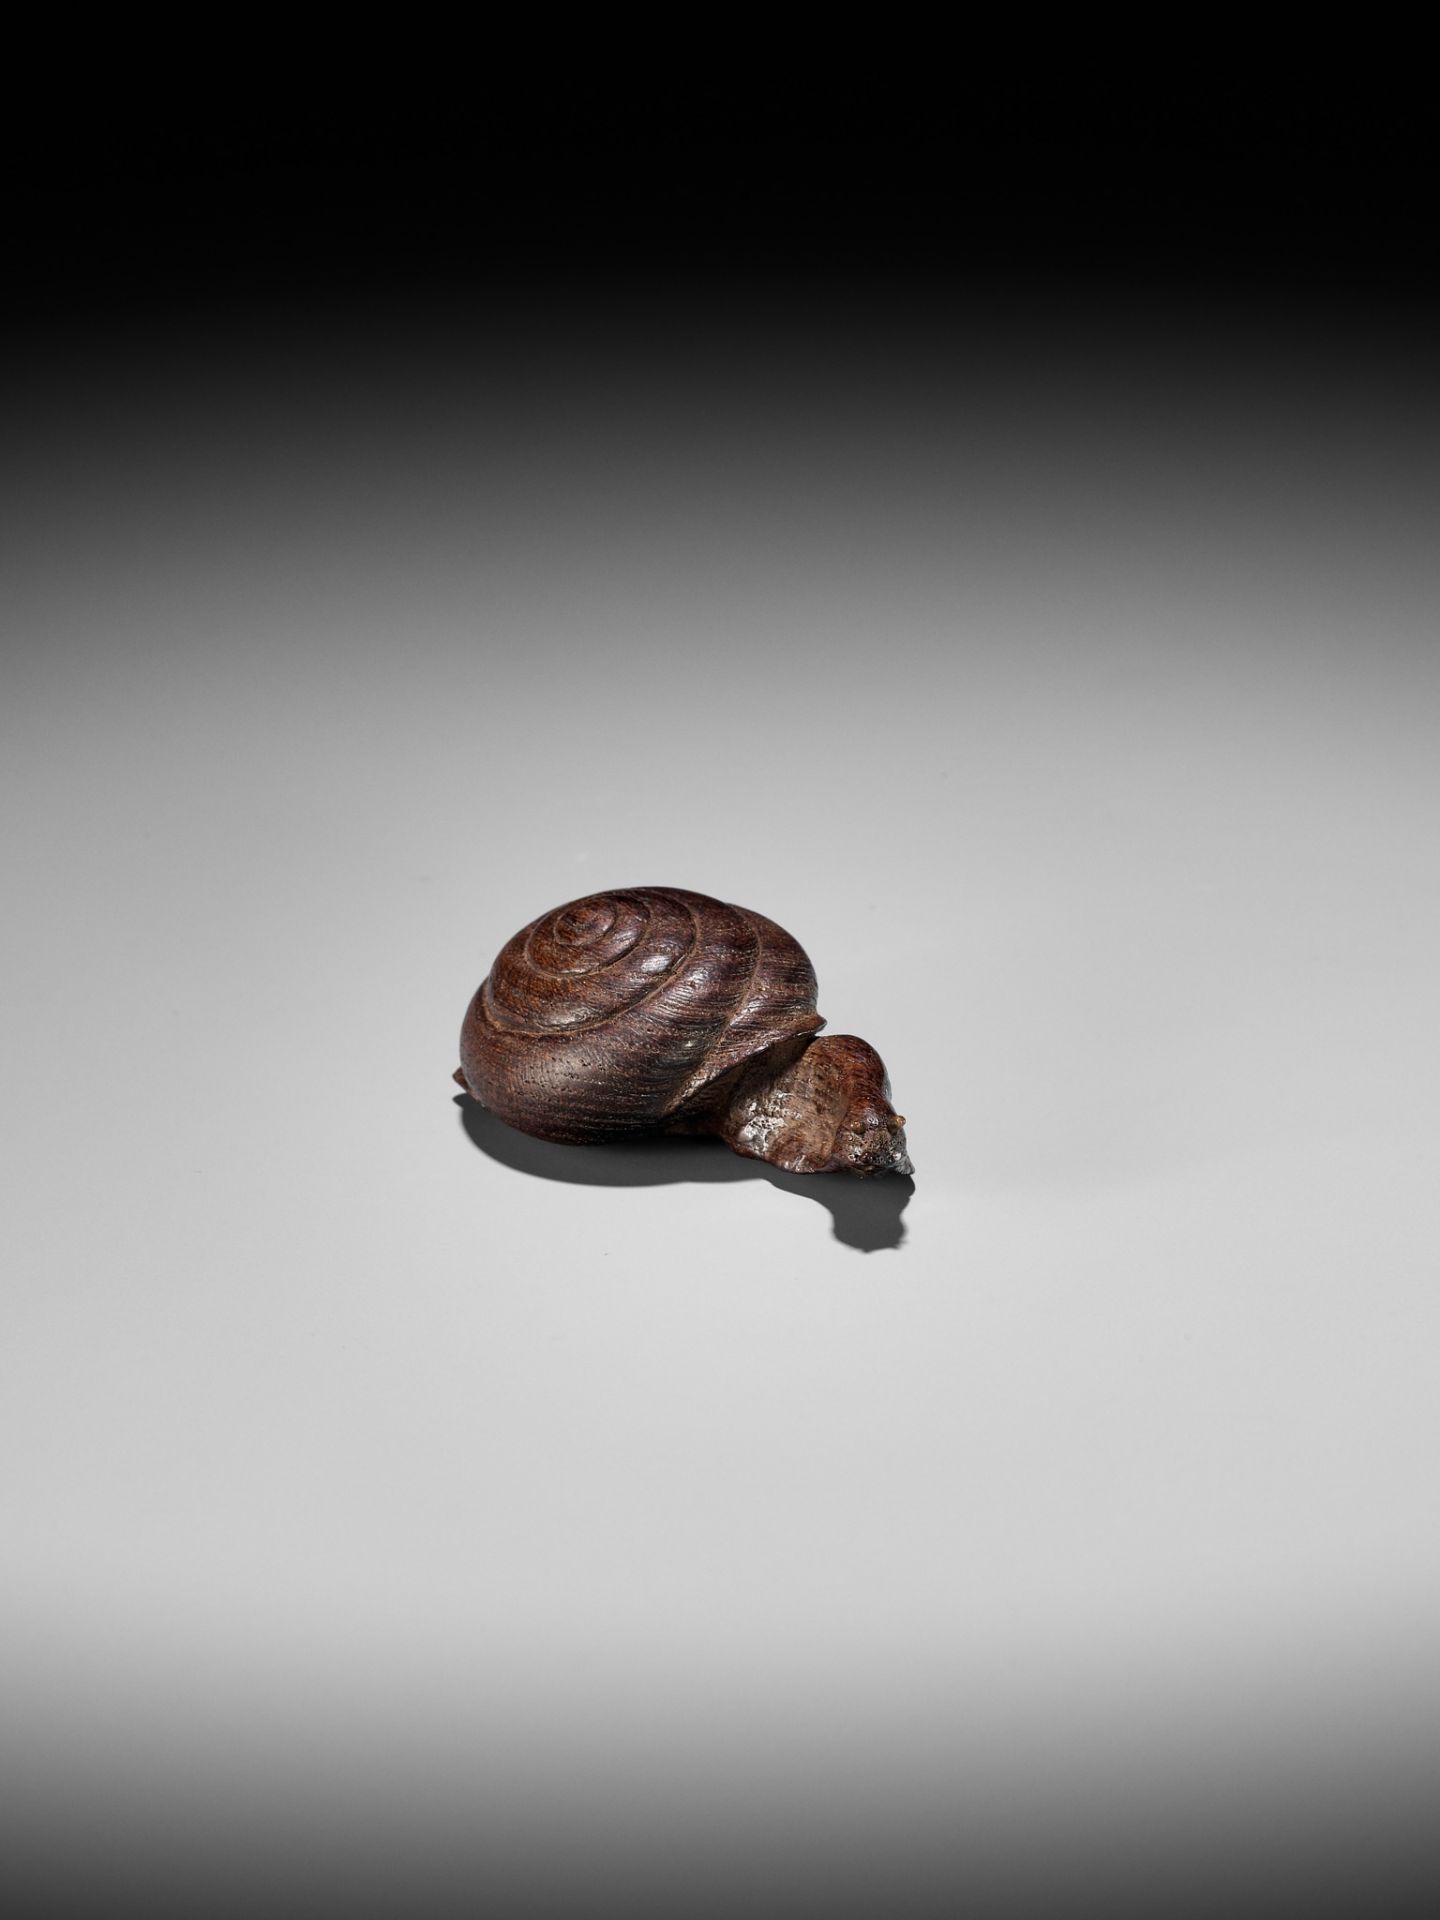 YUZAN: AN UNUSUAL WOOD NETSUKE OF A SNAIL EMERGING FROM ITS SHELL - Image 3 of 11